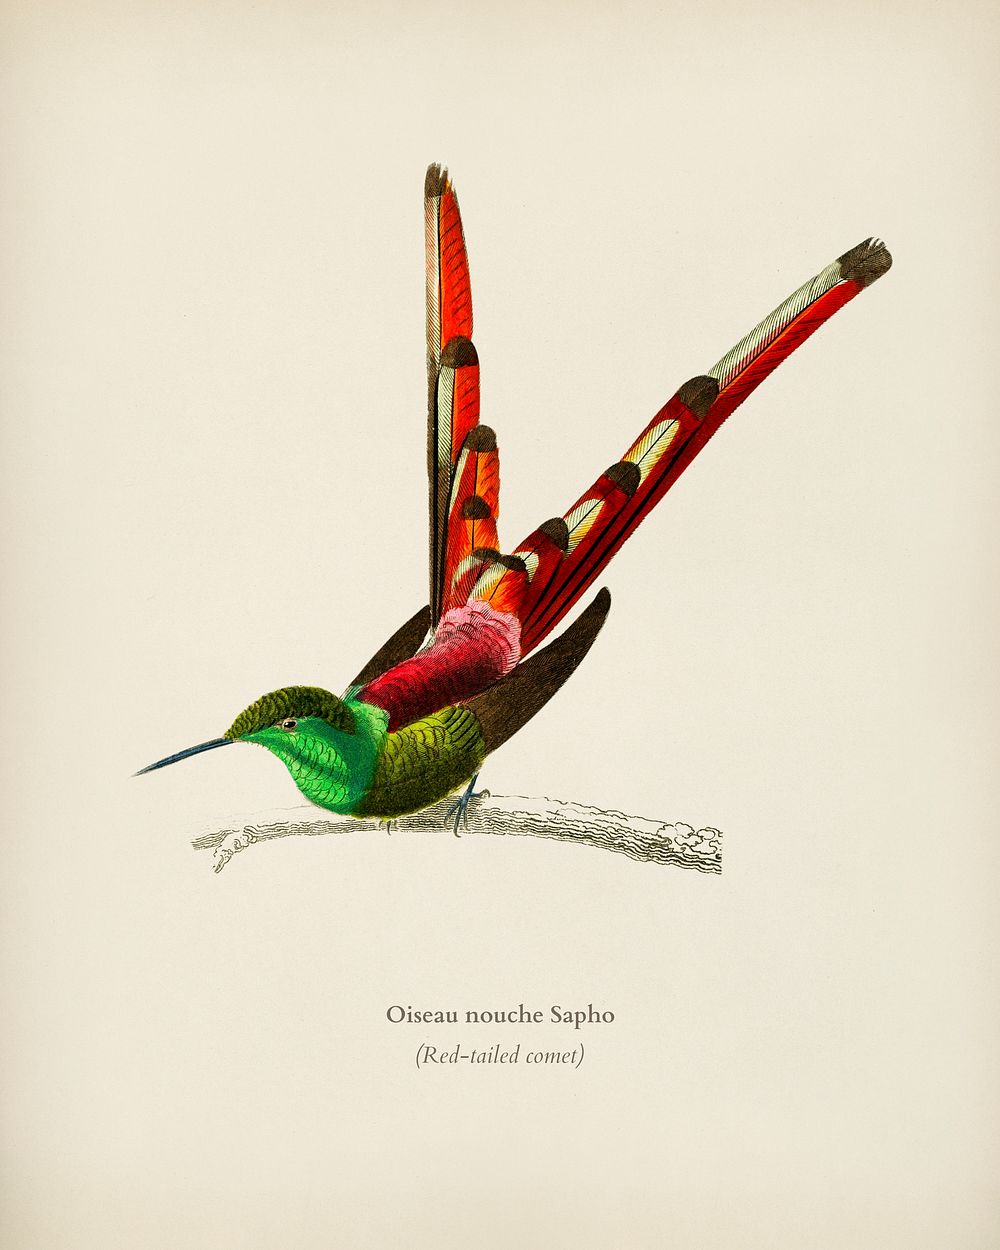 Red-tailed comet (Oiseau nouche Sapho) illustrated by Charles Dessalines D' Orbigny (1806-1876). Digitally enhanced from our…